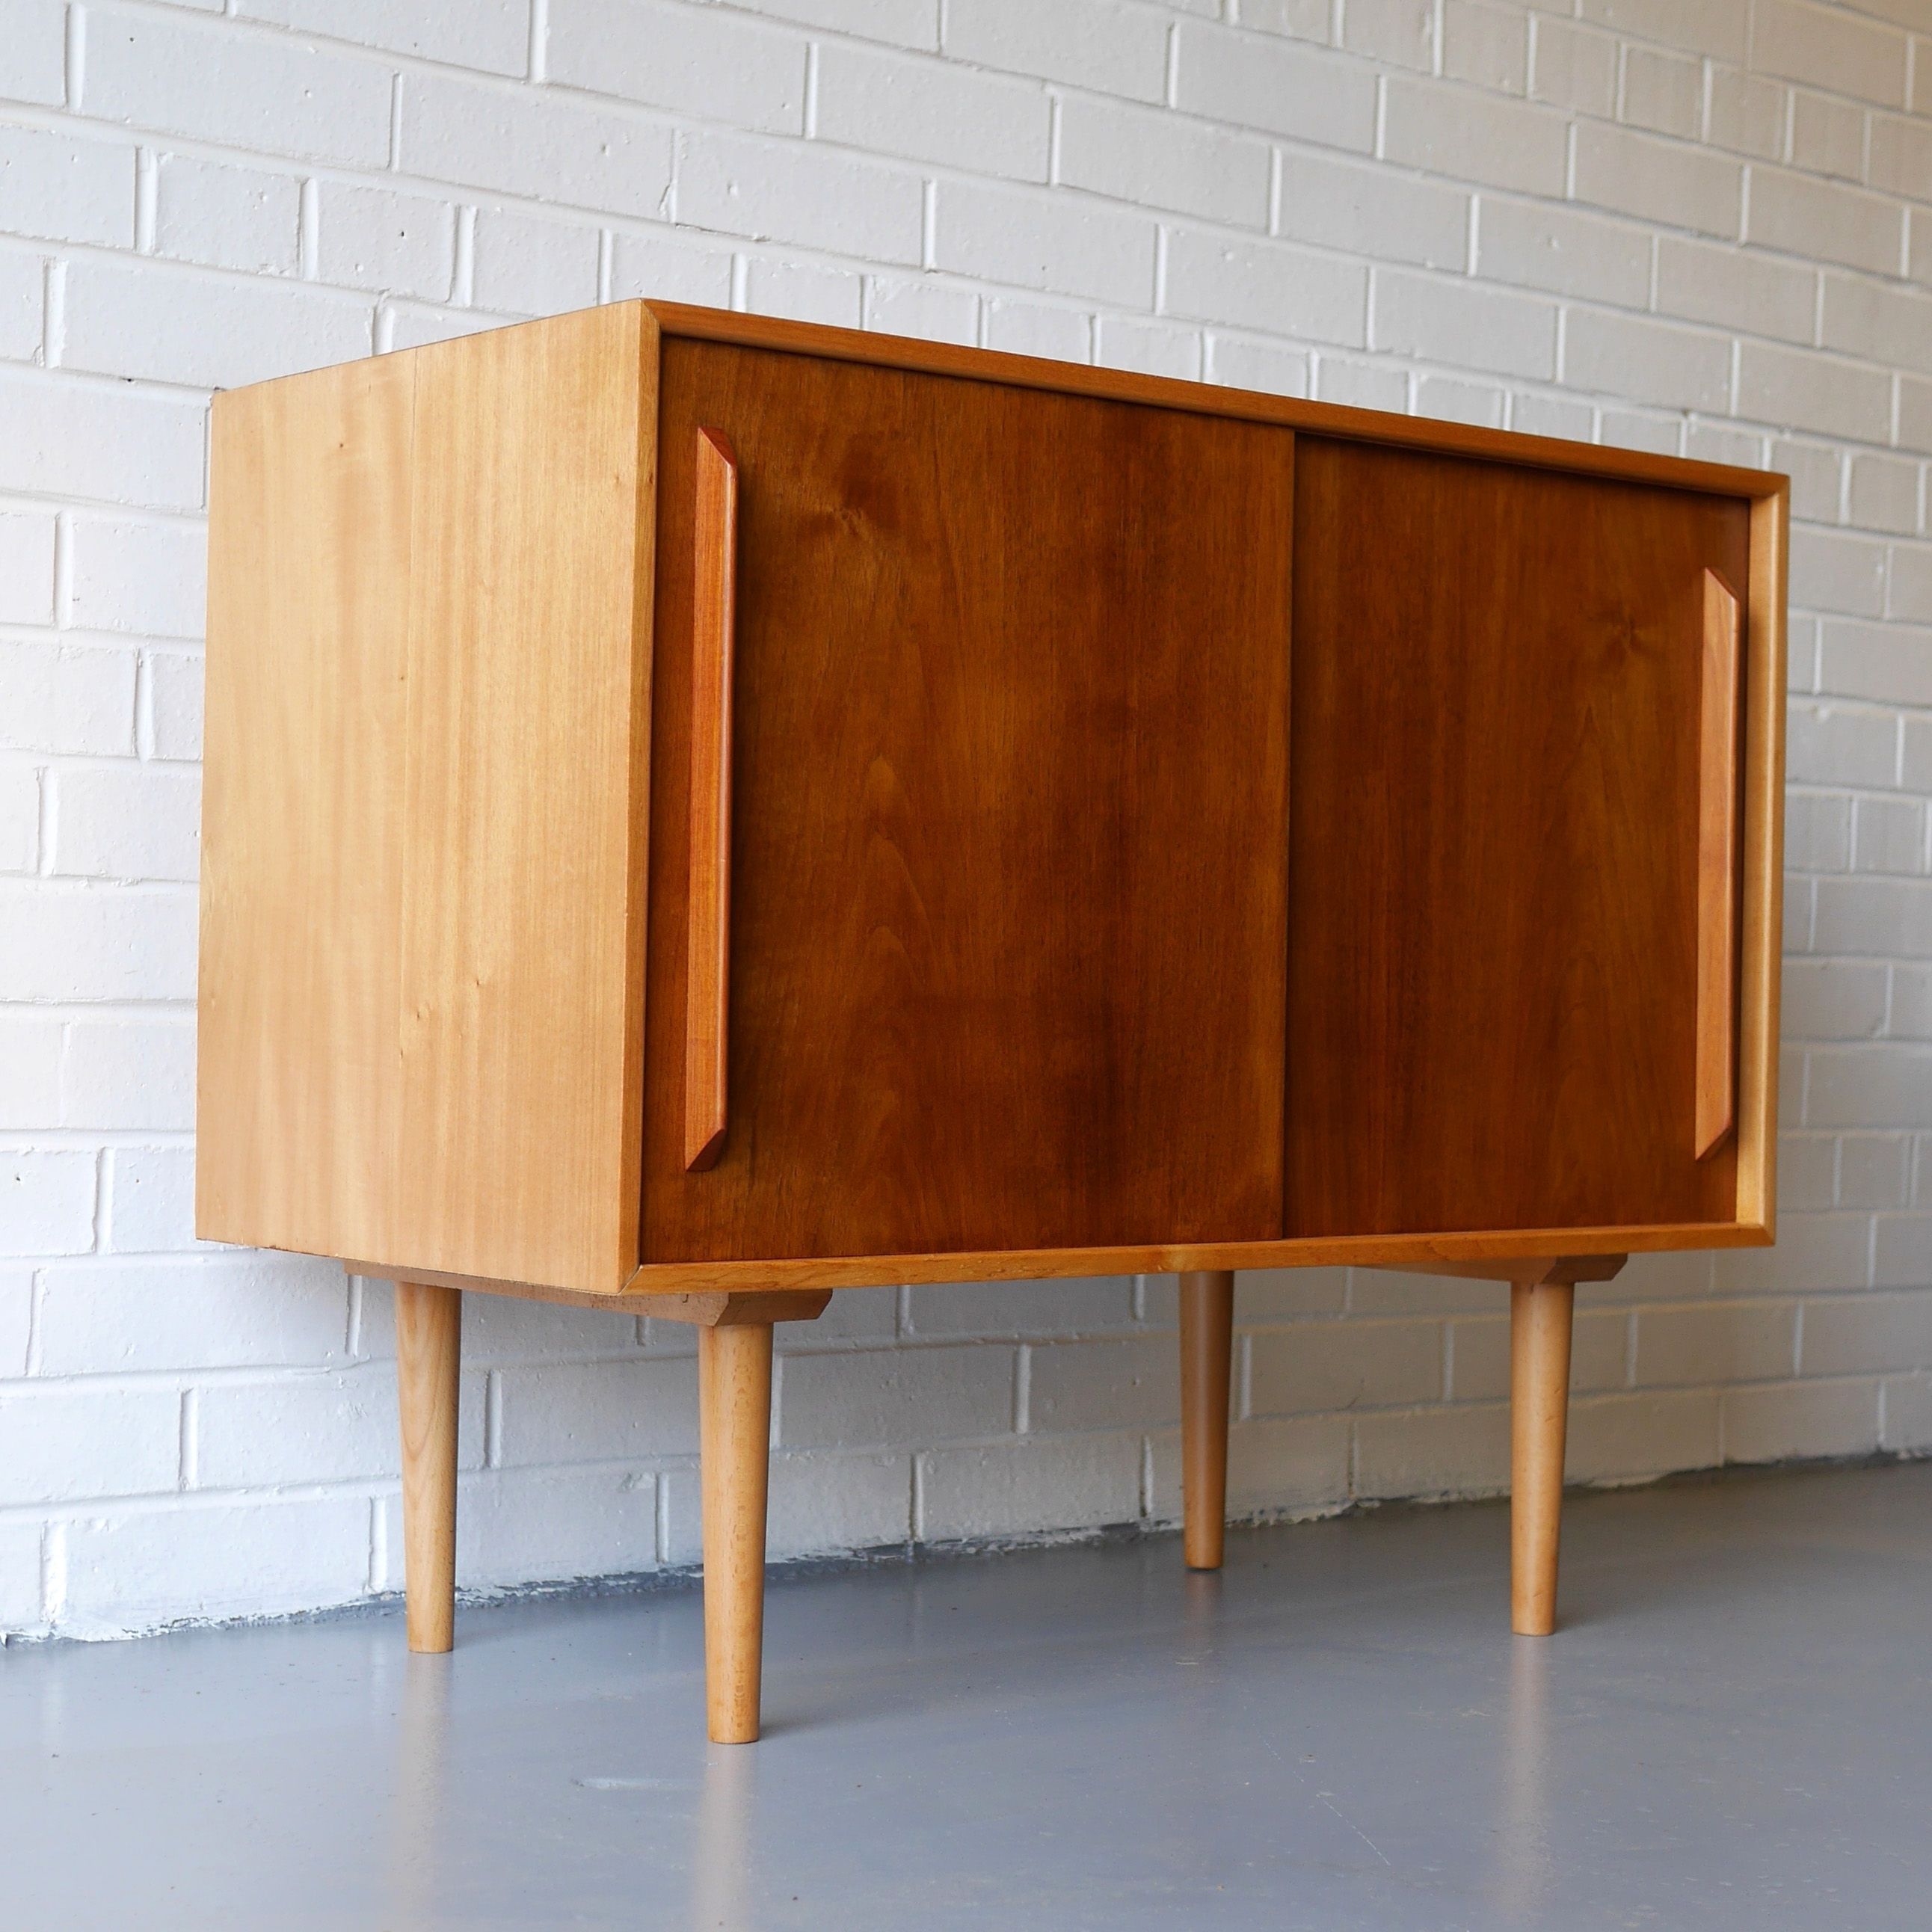 Robin Day Hilleplan Unit 'c' Cabinet / Sideboard C (View 20 of 20)